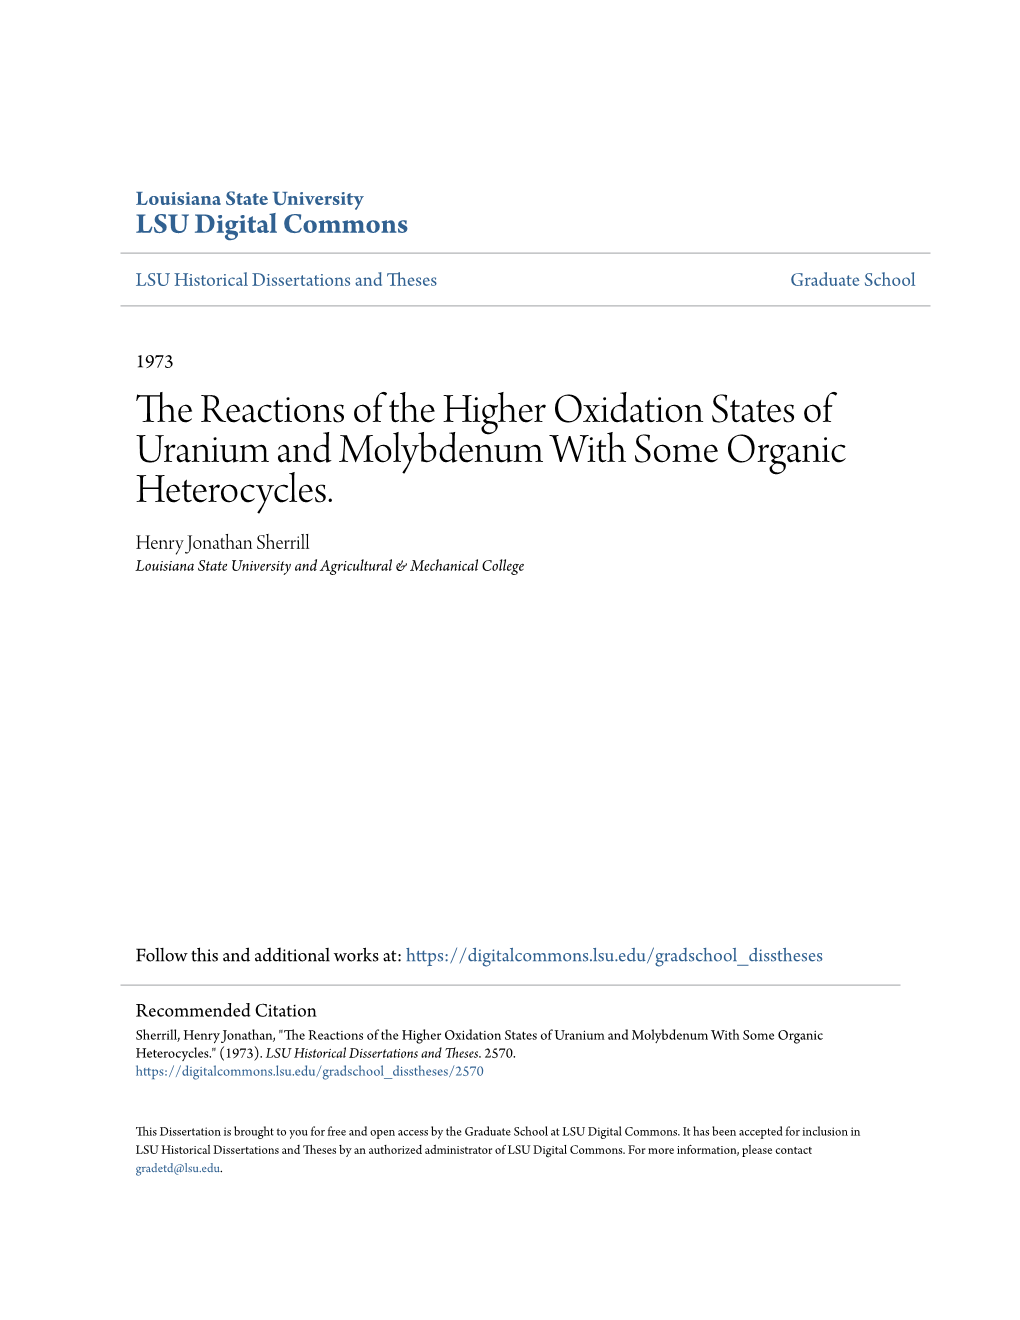 The Reactions of the Higher Oxidation States of Uranium and Molybdenum with Some Organic Heterocycles